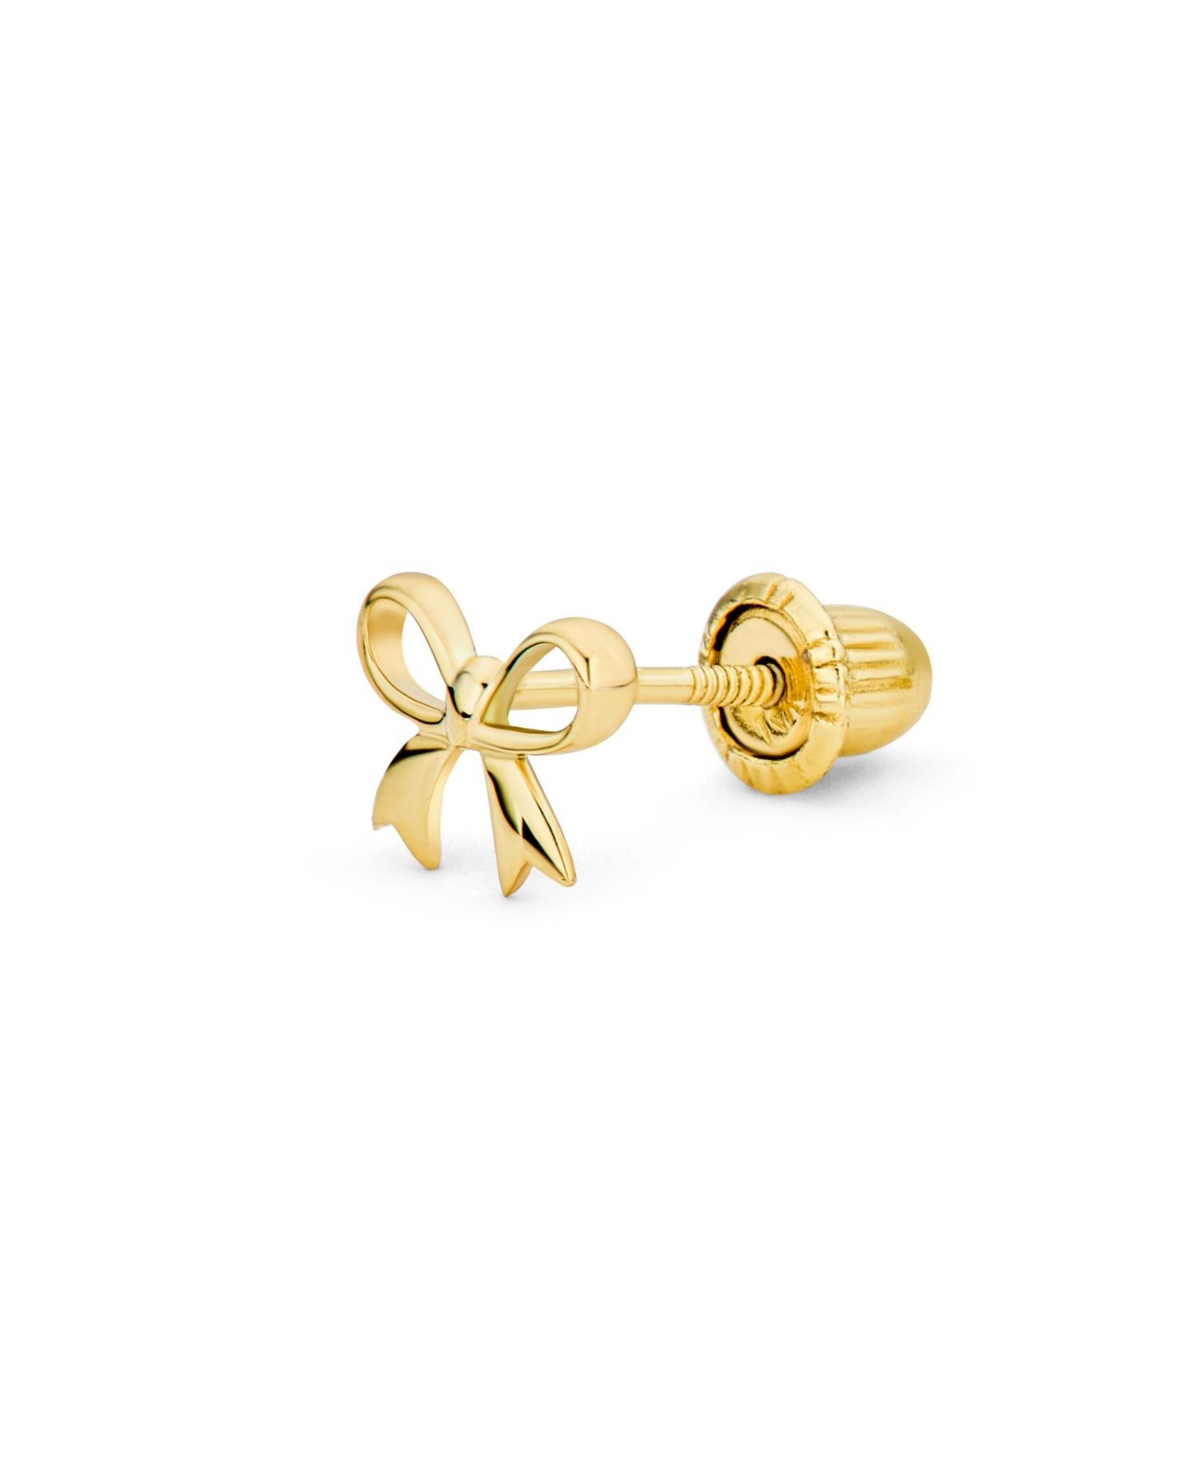 Dainty Tiny Birthday Present Ribbon Solid Real 14K Yellow Gold Mini Bow Cartilage Ear Lobe Stud Earring Safety Clutch Screw Back 1 Piece